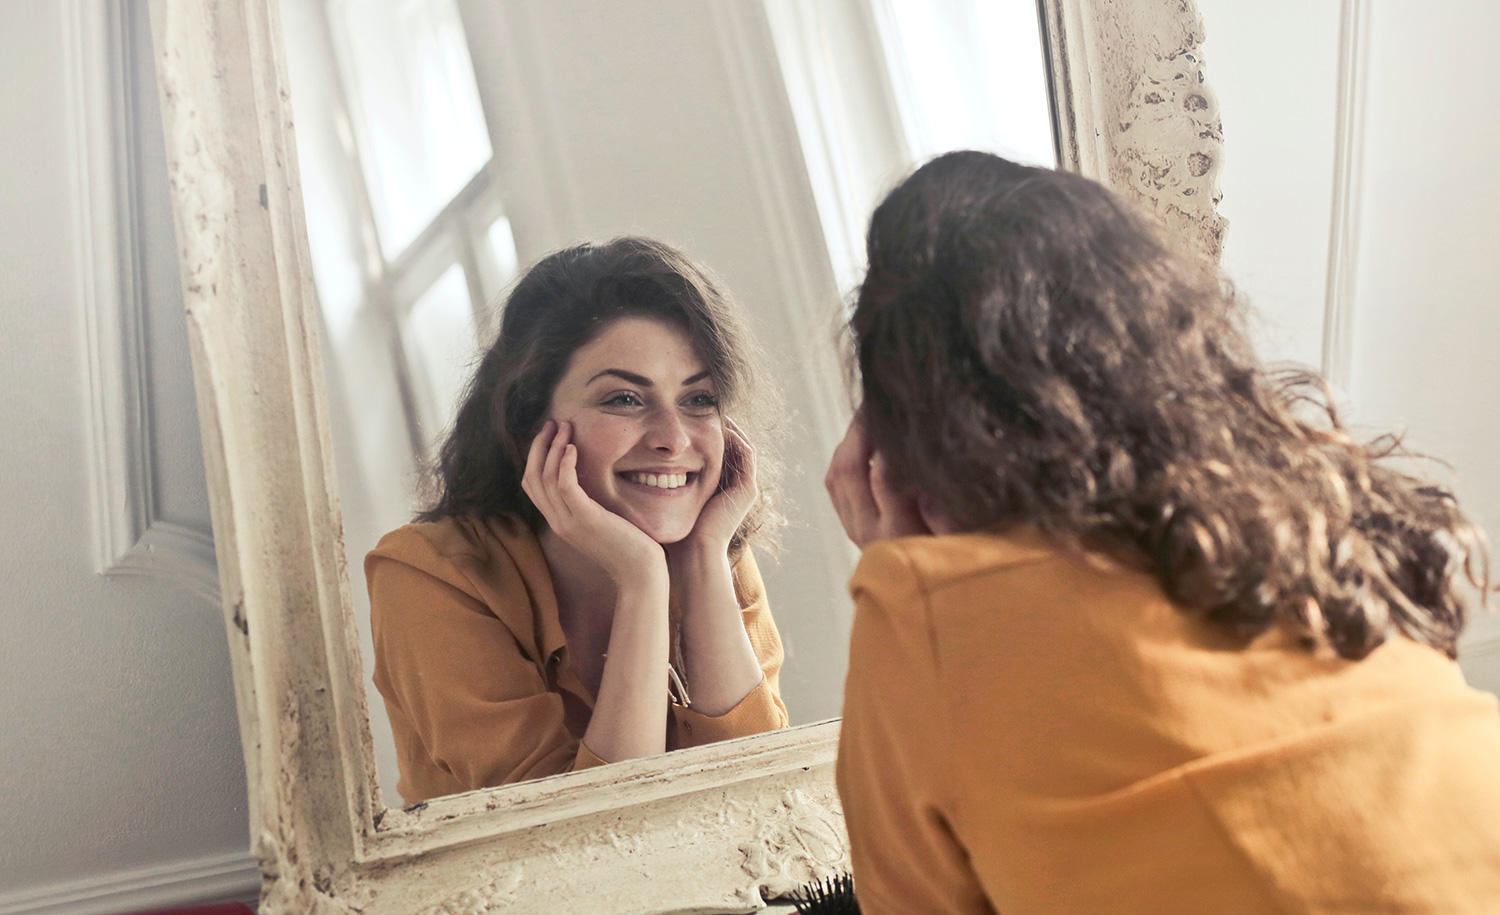 A highly sensitive person smiling at herself in the mirror